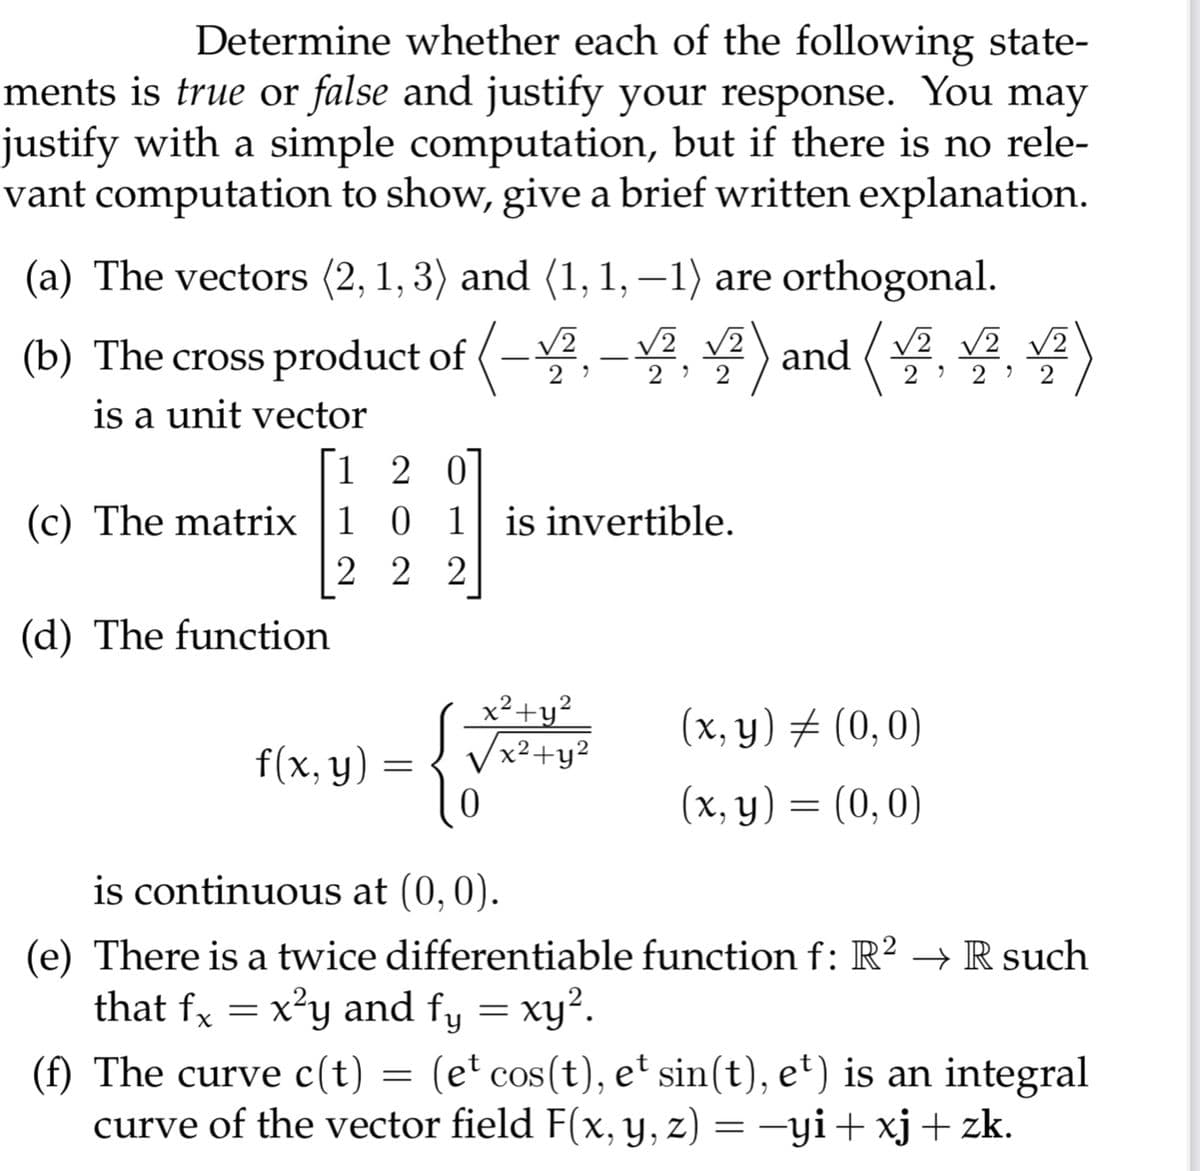 Determine whether each of the following state-
ments is true or false and justify your response. You may
justify with a simple computation, but if there is no rele-
vant computation to show, give a brief written explanation.
(a) The vectors (2, 1, 3) and (1, 1, –1) are orthogonal.
V2 V2
(b) The cross product of (-,-, ) and ( v v2
2
2
is a unit vector
[1 2 0
(c) The matrix 1
1
0 1 is invertible.
2 2 2
(d) The function
x²+y²
x²+y?
2
(x, y) # (0,0)
f(x, y)
(x, y) = (0,0)
6.
is continuous at (0,0).
(e) There is a twice differentiable function f: R? → R such
that fx = x²y and fy = xy².
(f) The curve c(t) = (e' cos(t), et sin(t), e') is an integral
curve of the vector field F(x, y, z) = -yi+ xj+ zk.
